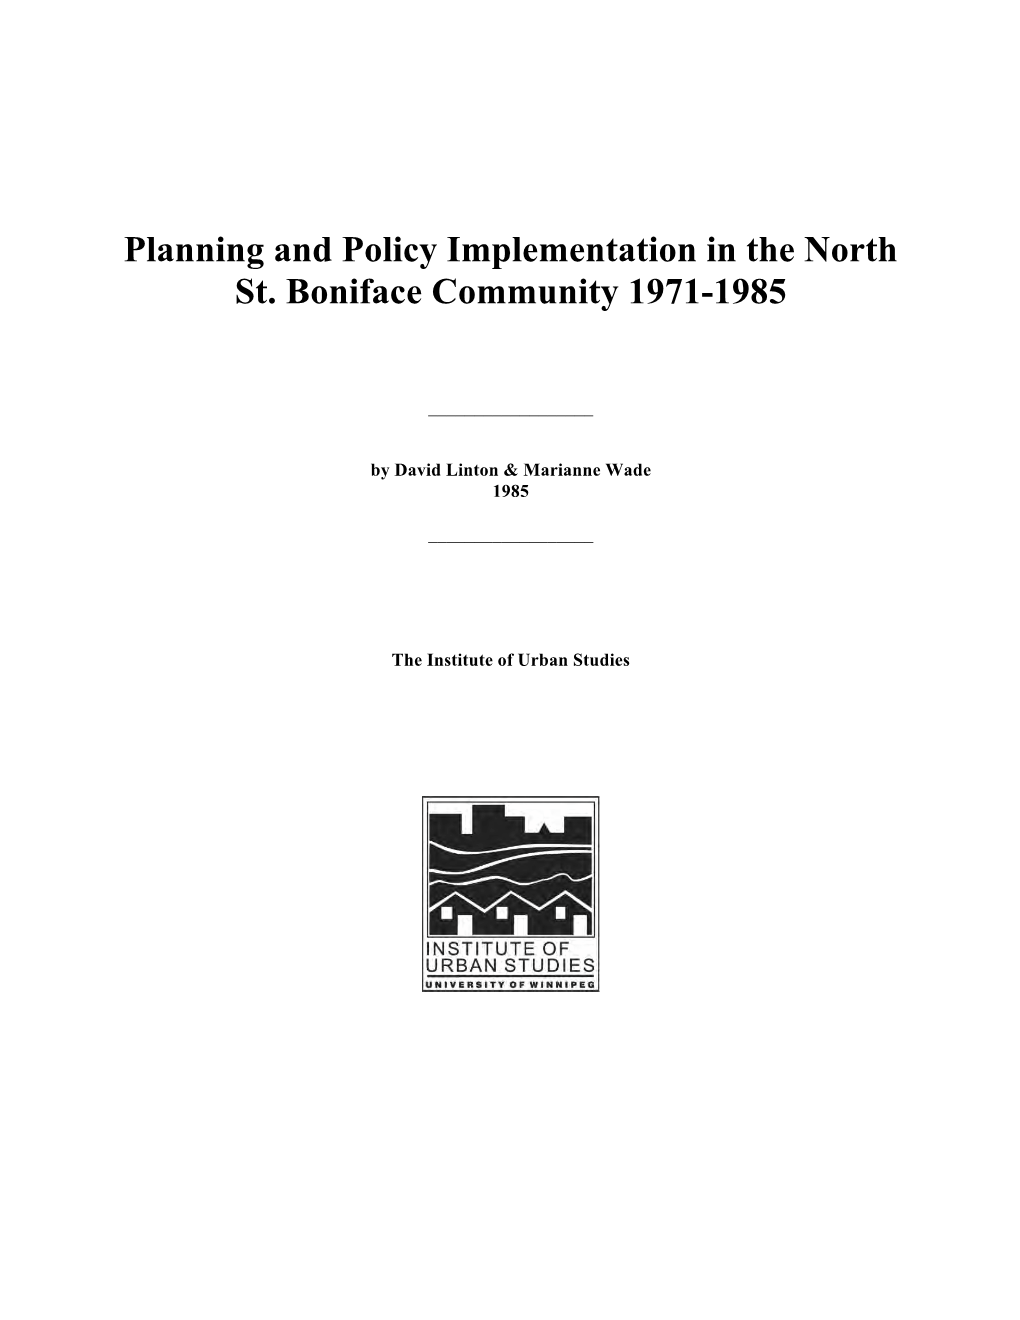 Planning and Policy Implementation in the North St. Boniface Community 1971-1985